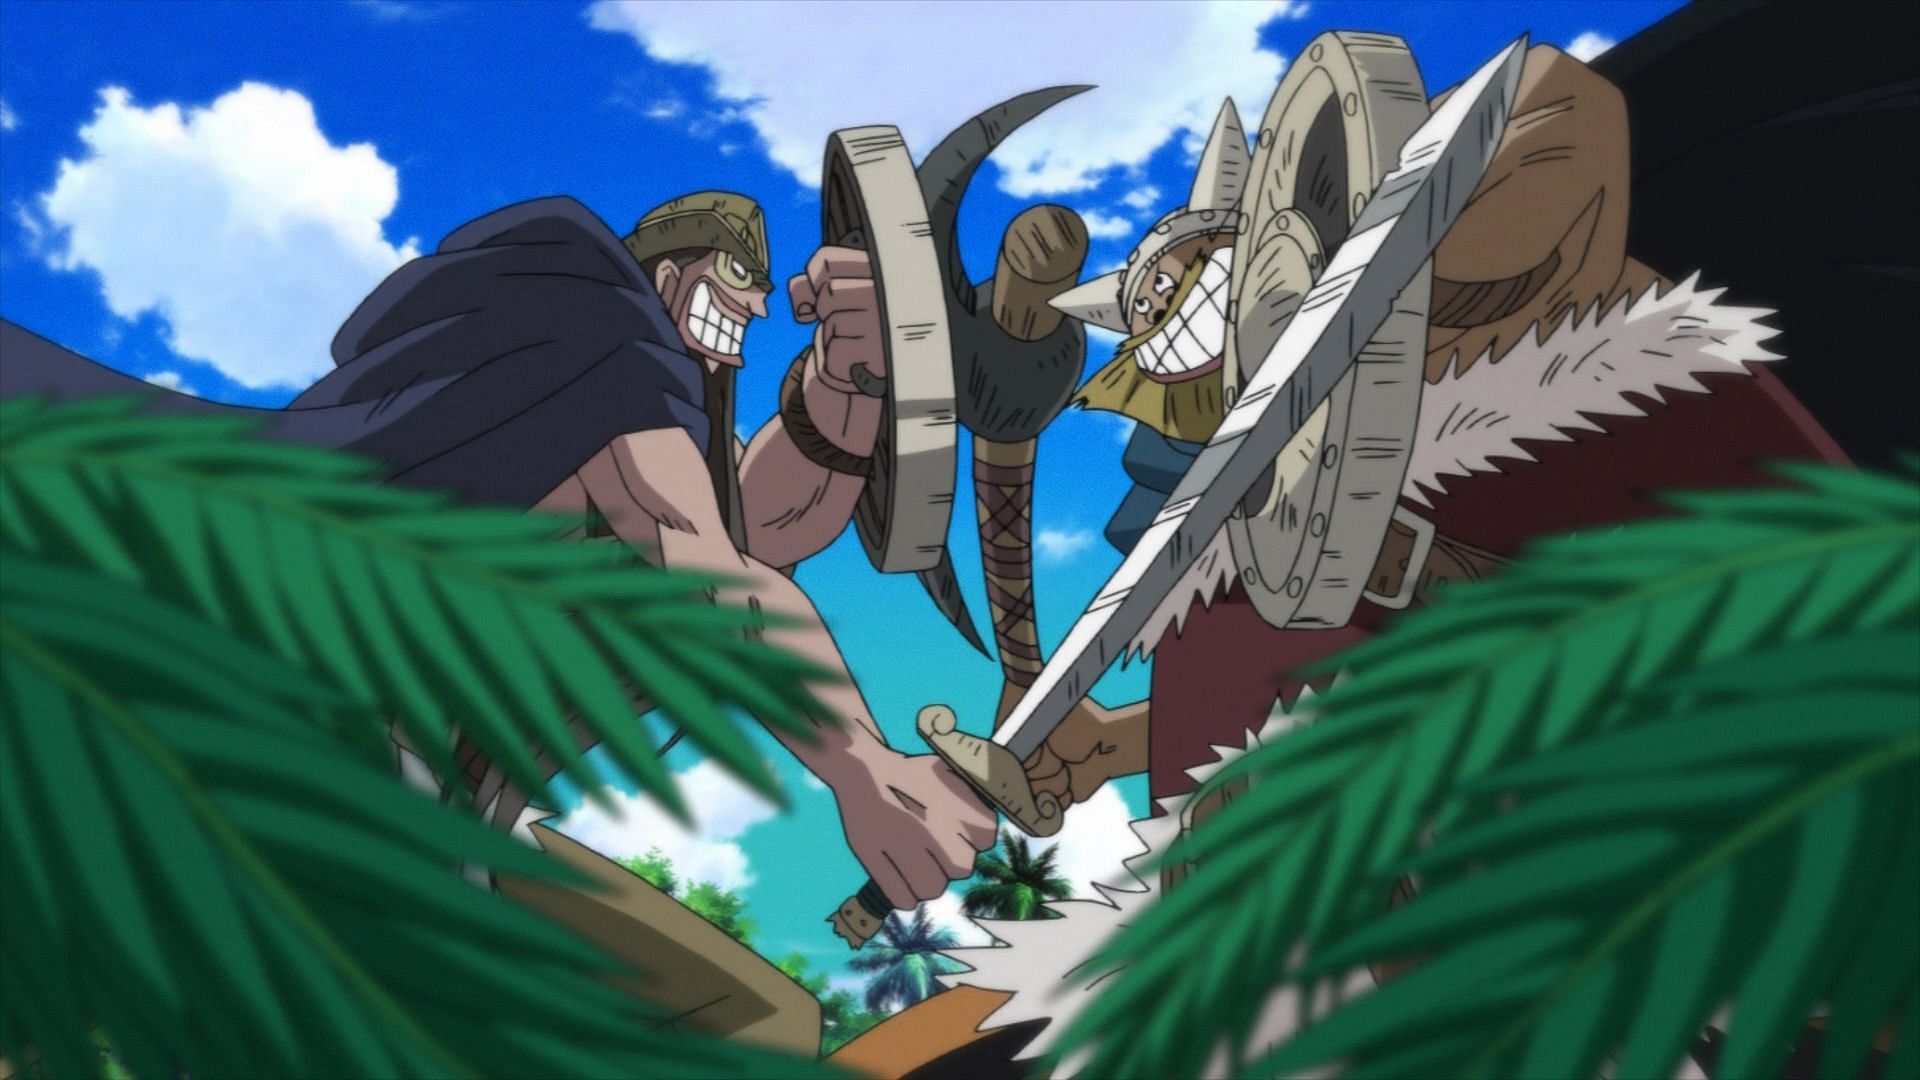 Dorry and Brogy will likely continue their rescue of the Straw Hats in One Piece chapter 1112 (Image via Toei Animation)